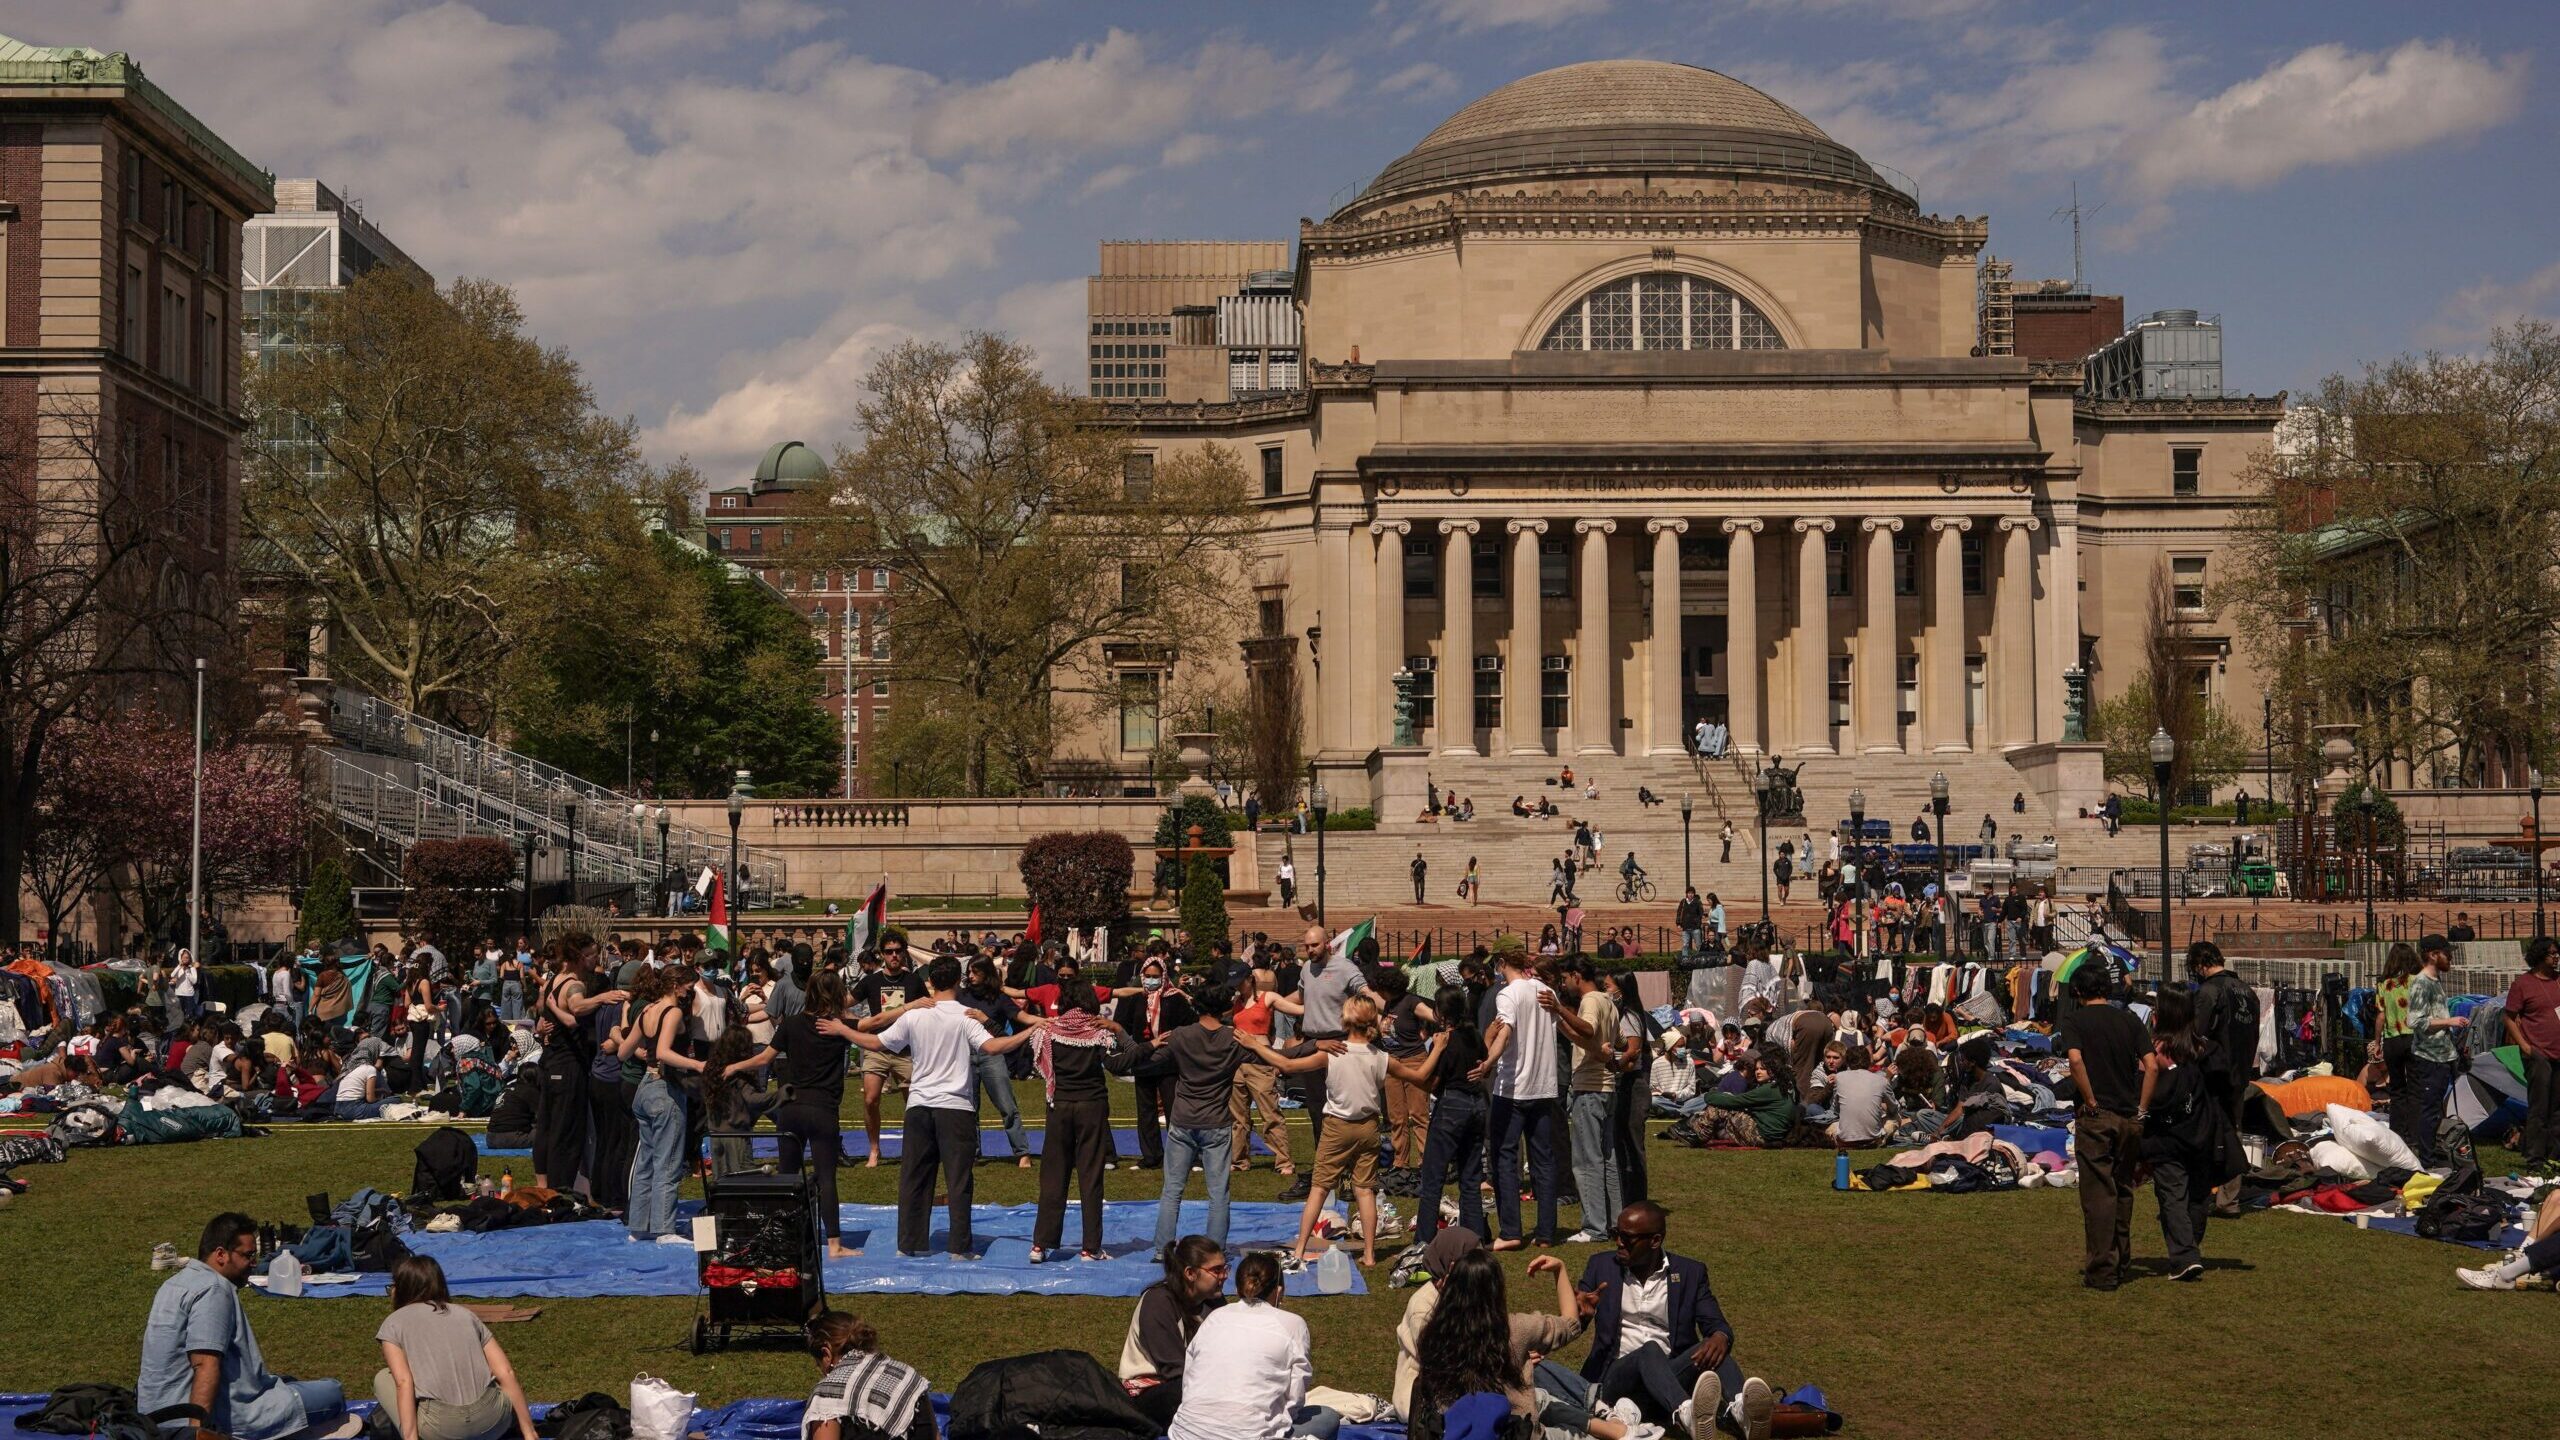 Student activists have spent multiple days occupying the lawns at Columbia University, calling for ...